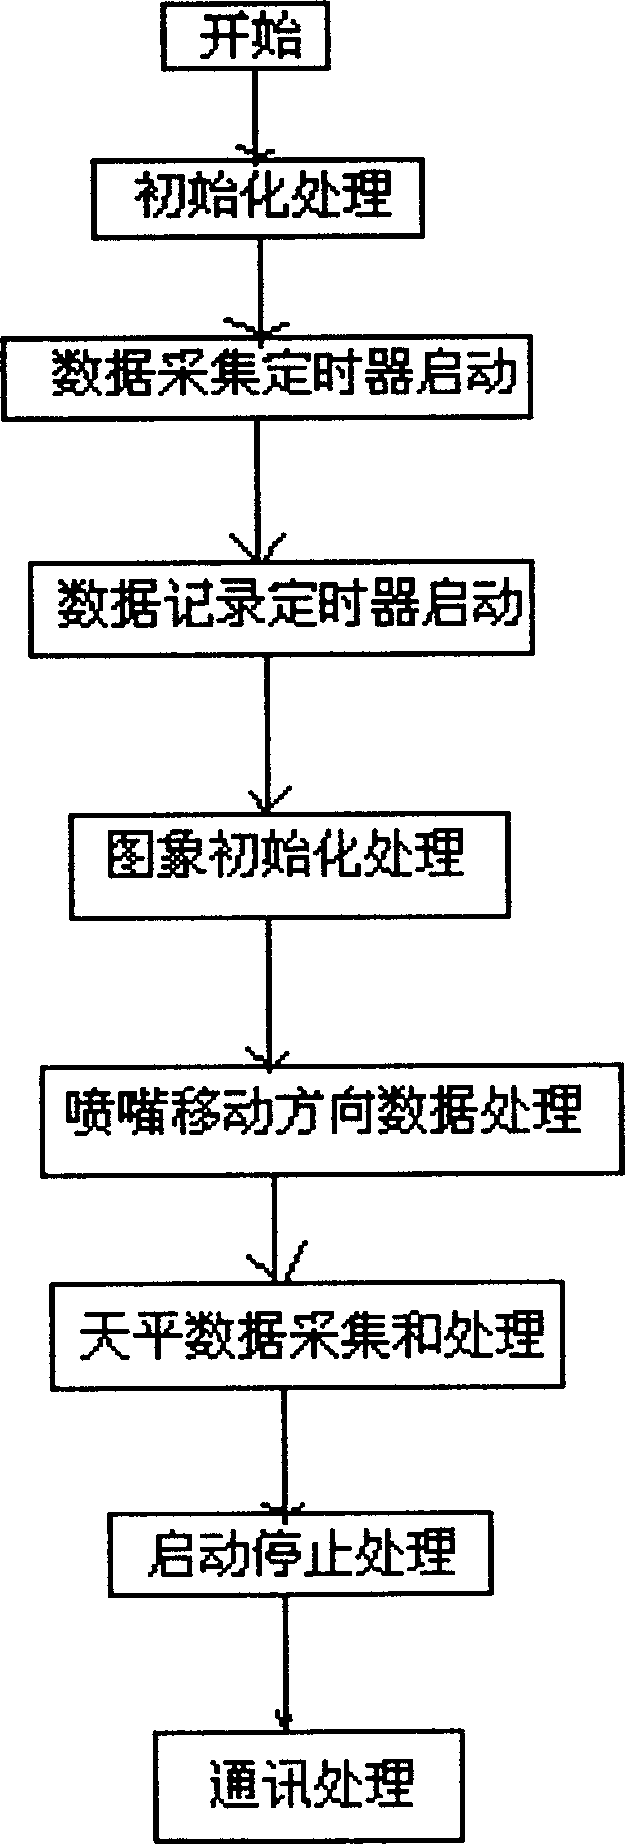 Method and apparatus for testing spraying characteristic of secondary cooling nozzle of continuous casting